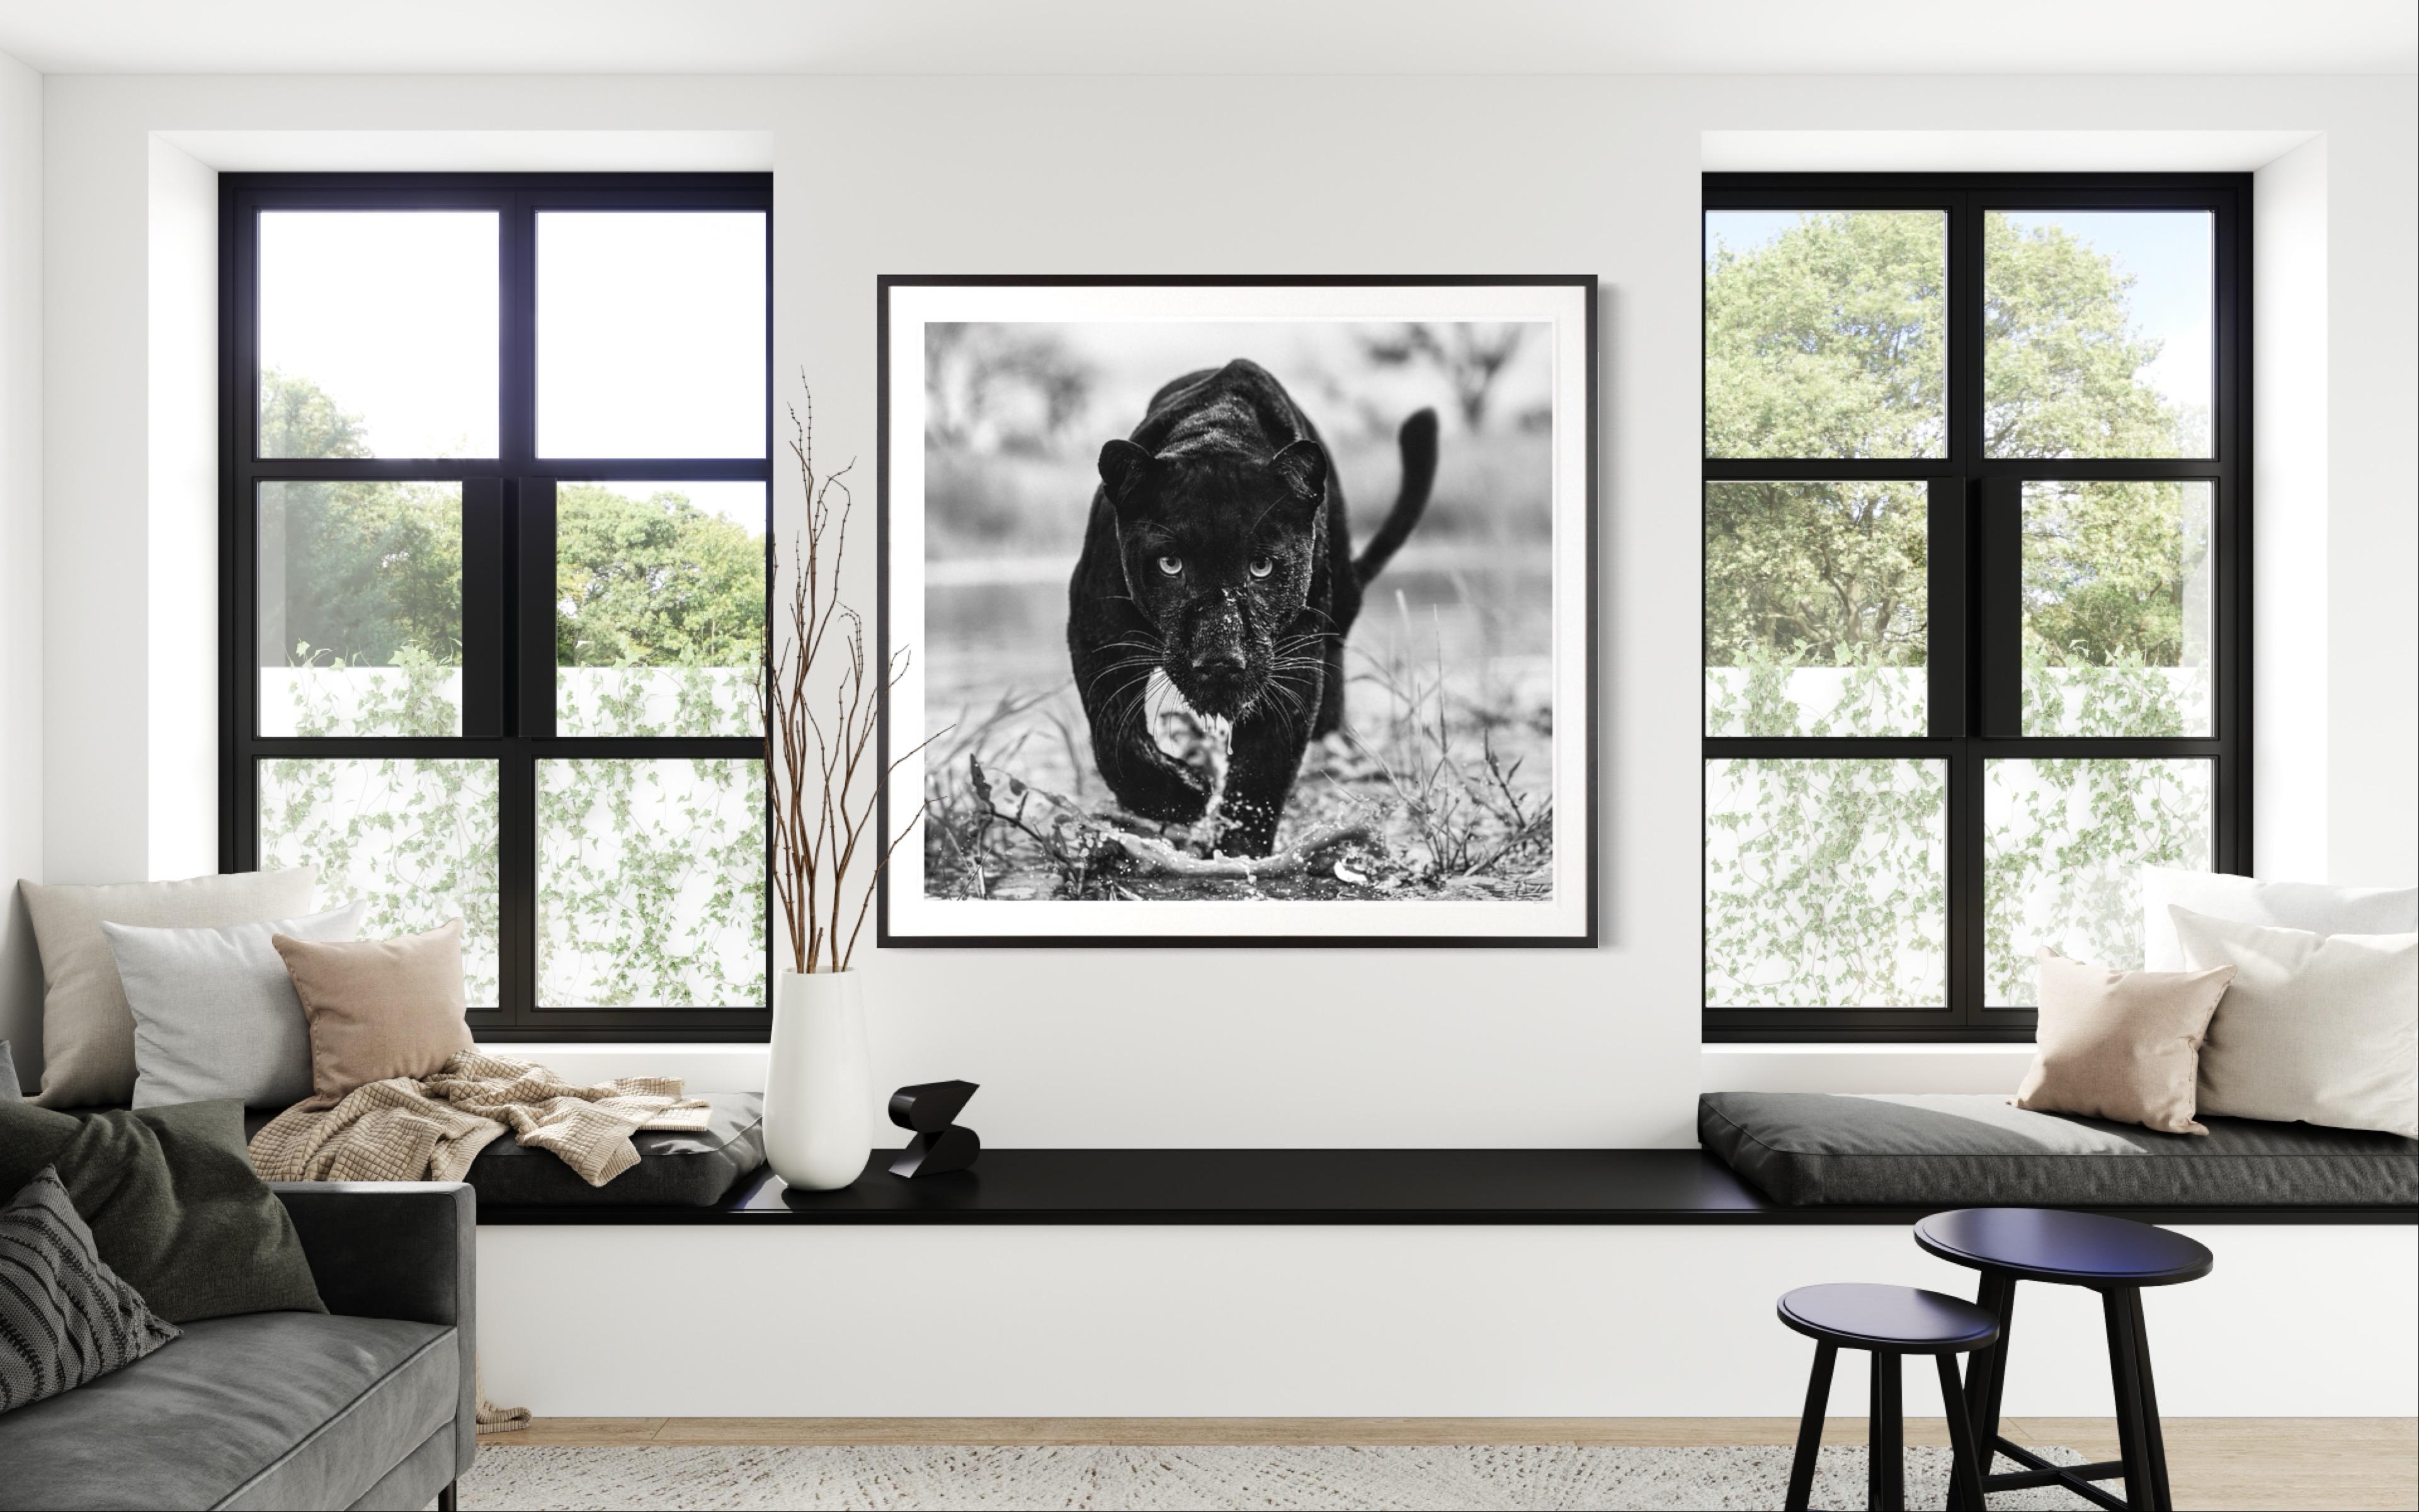 Marvel / Black and White Panther Framed Photo / South Africa Just Released  - Photograph by David Yarrow